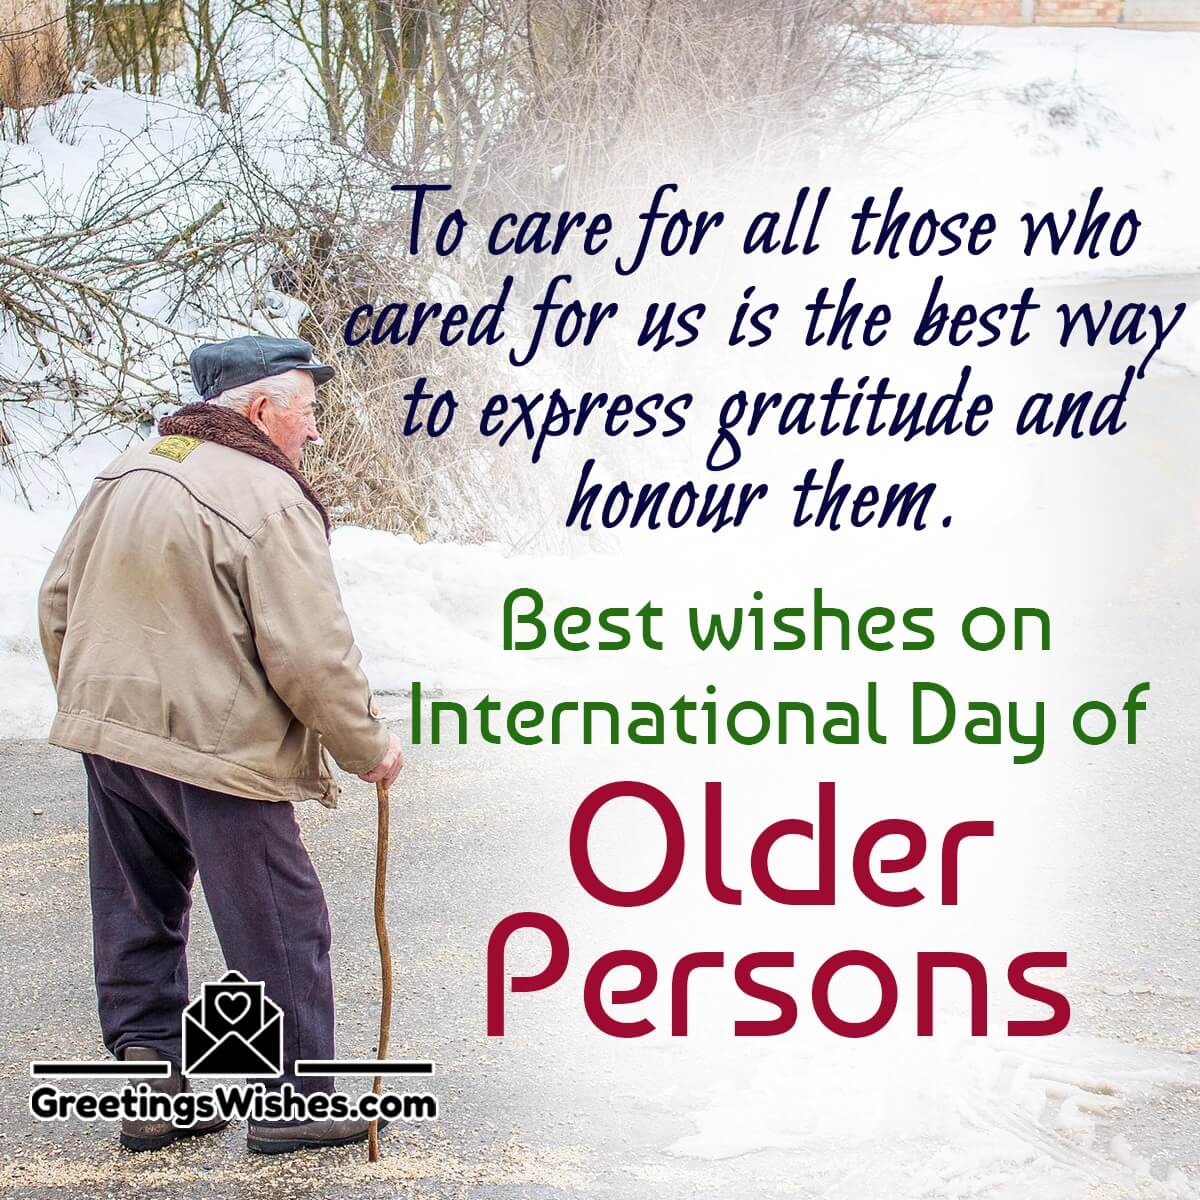 International Day Of Older Persons Wishes